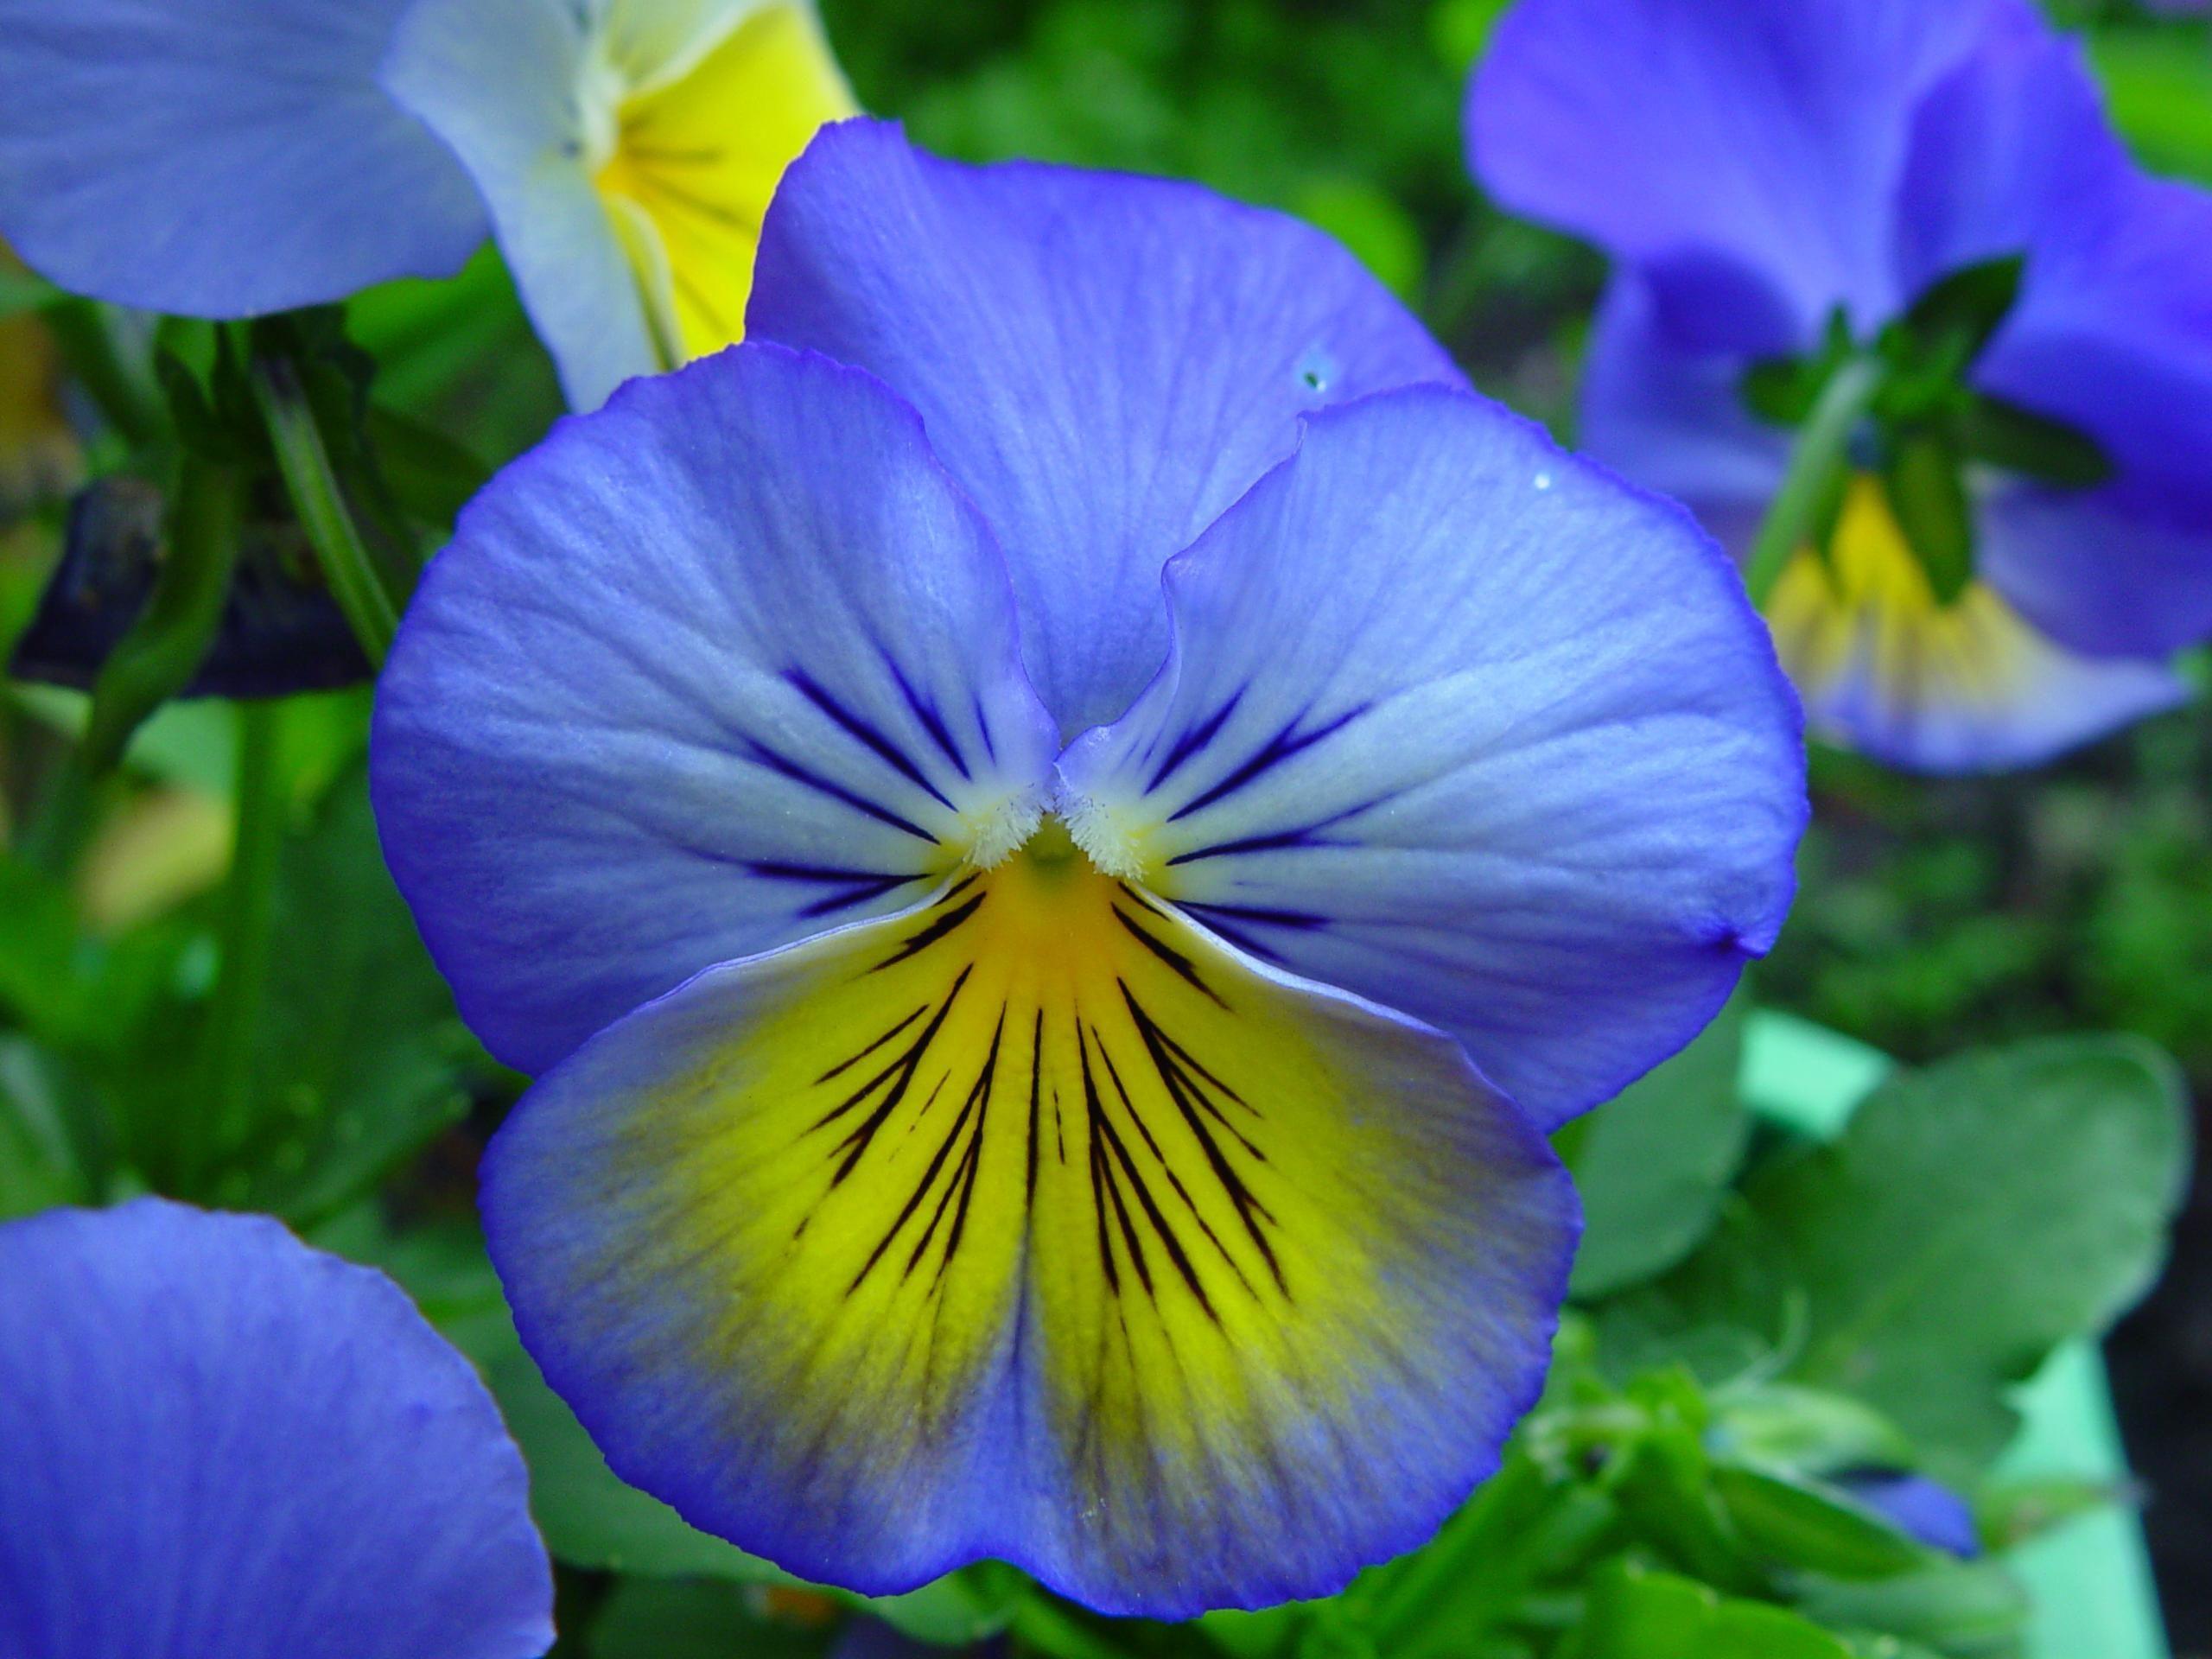 Blue and Yellow Flower Logo - File:Blue and yellow flowers.jpg - Wikimedia Commons